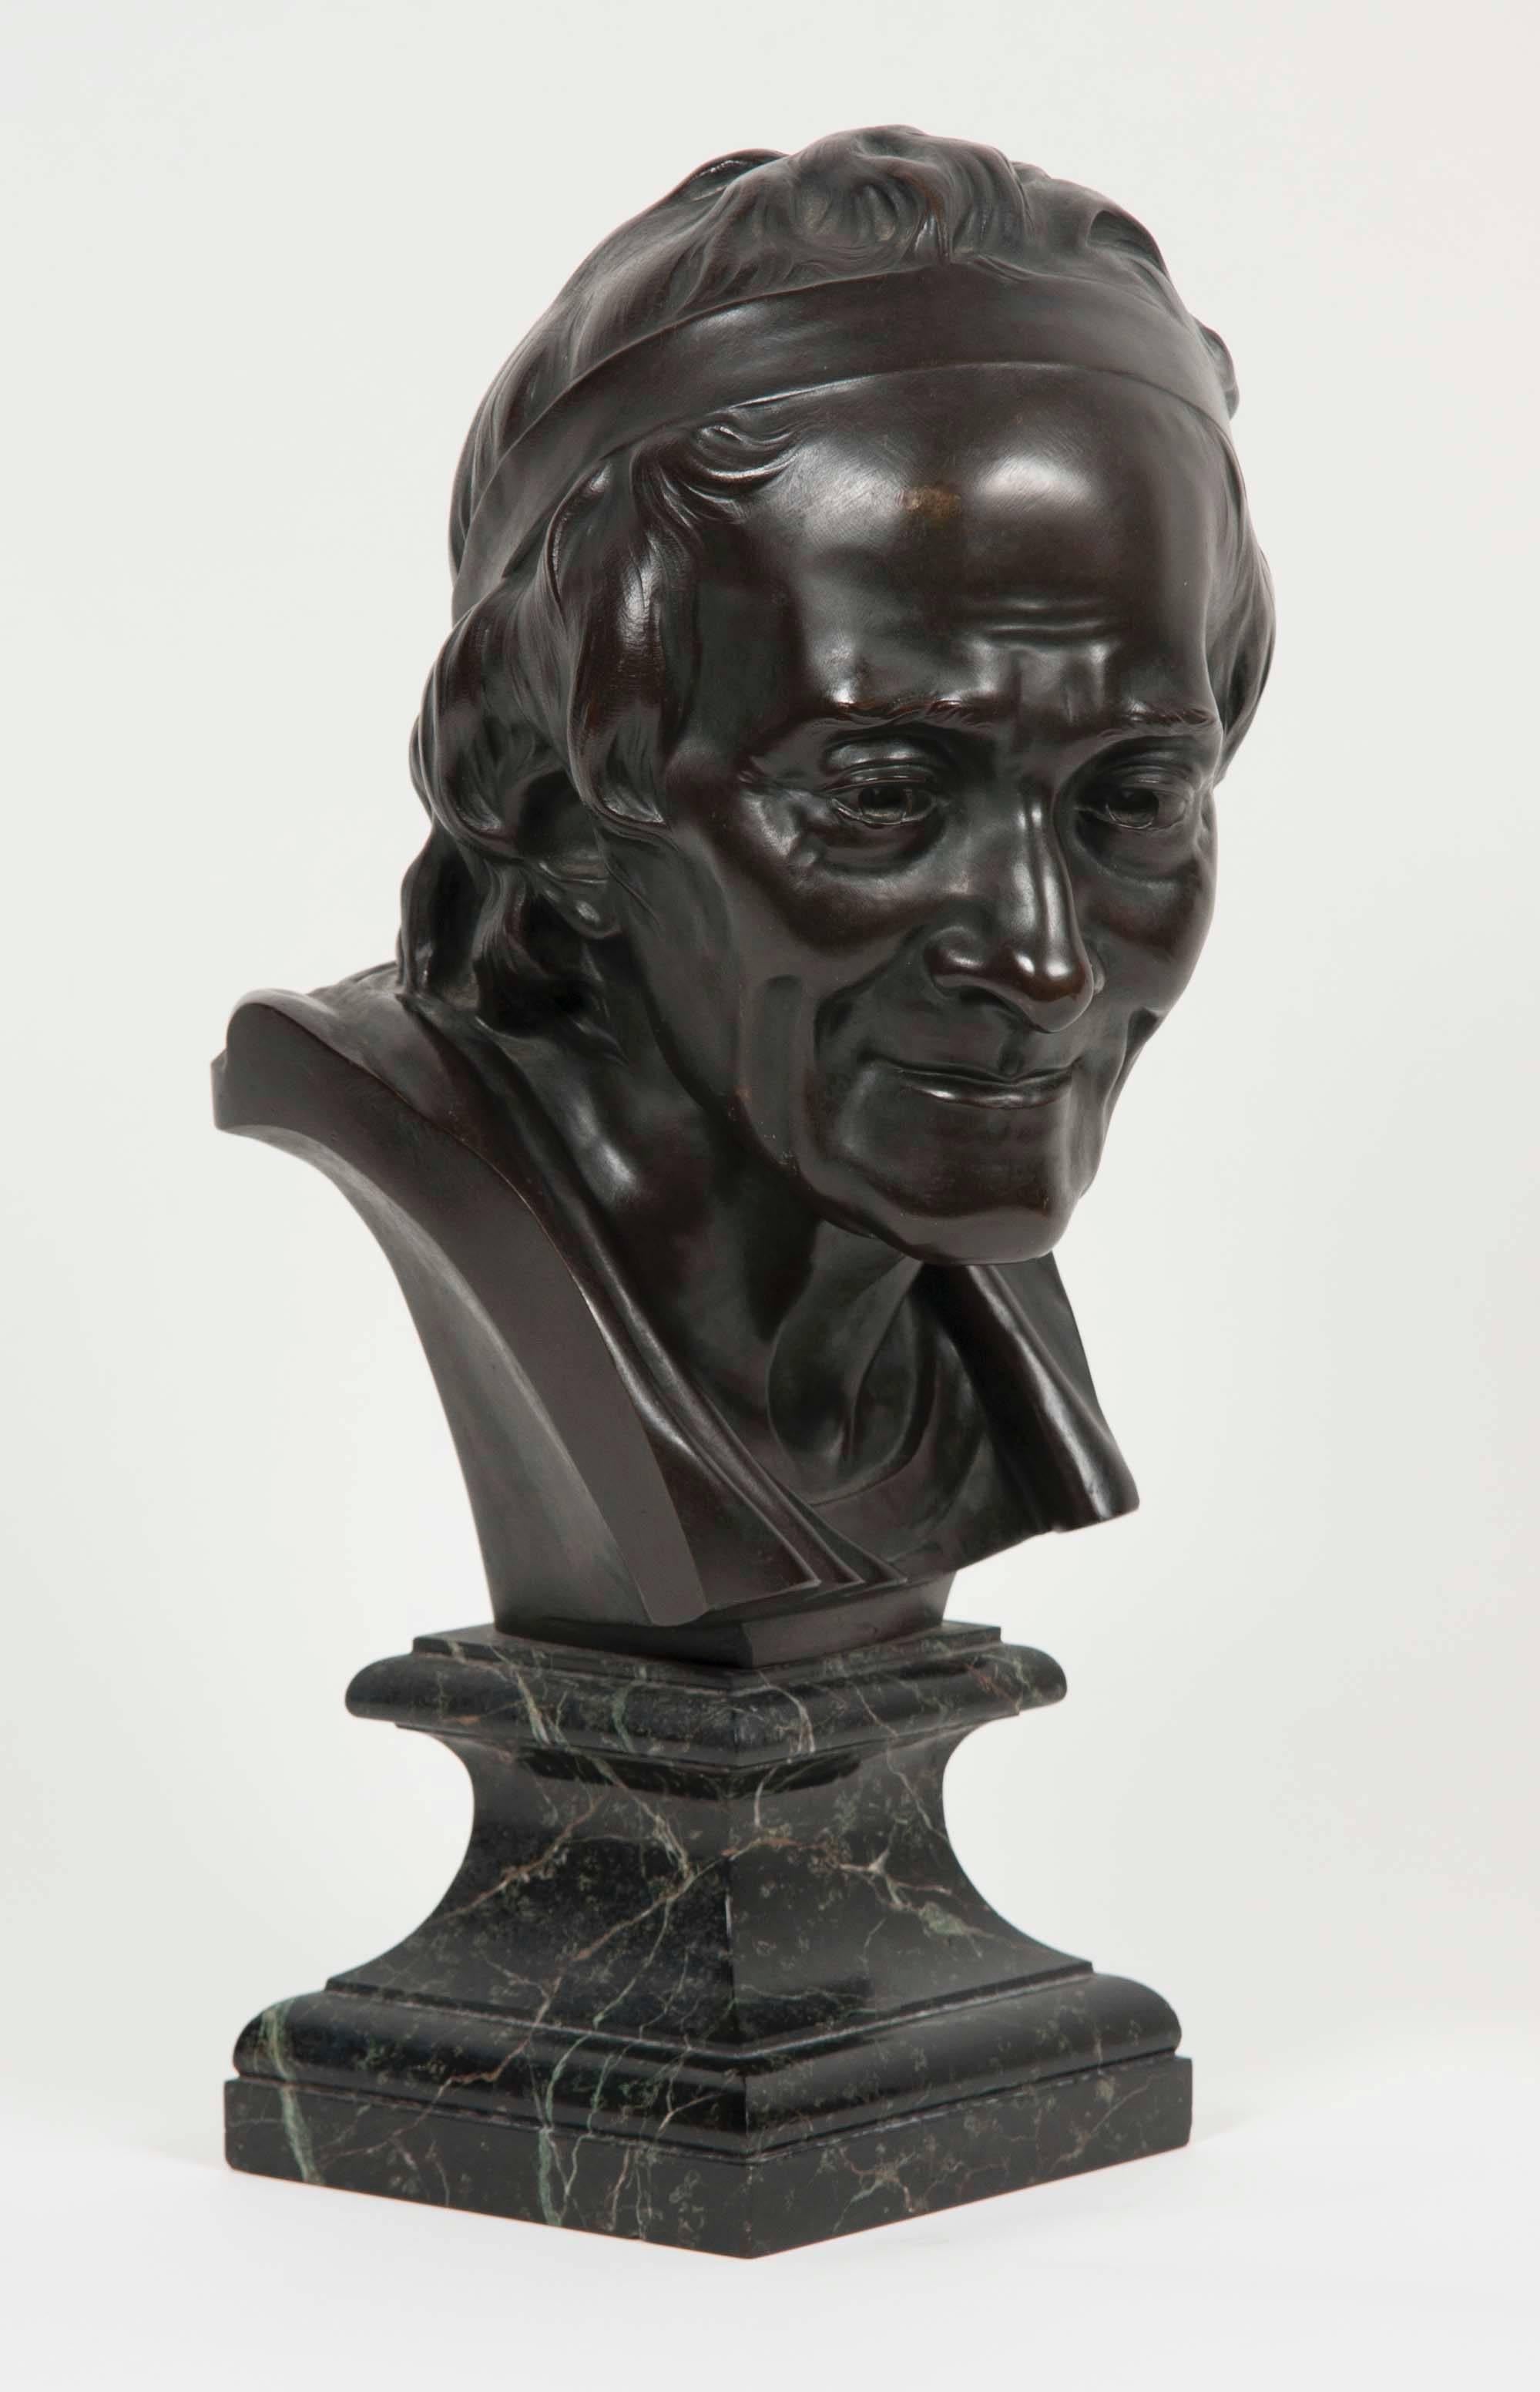 An early 20th century bronze bust of Voltaire after Jean Antoine Houdon, on black and white square marble base.